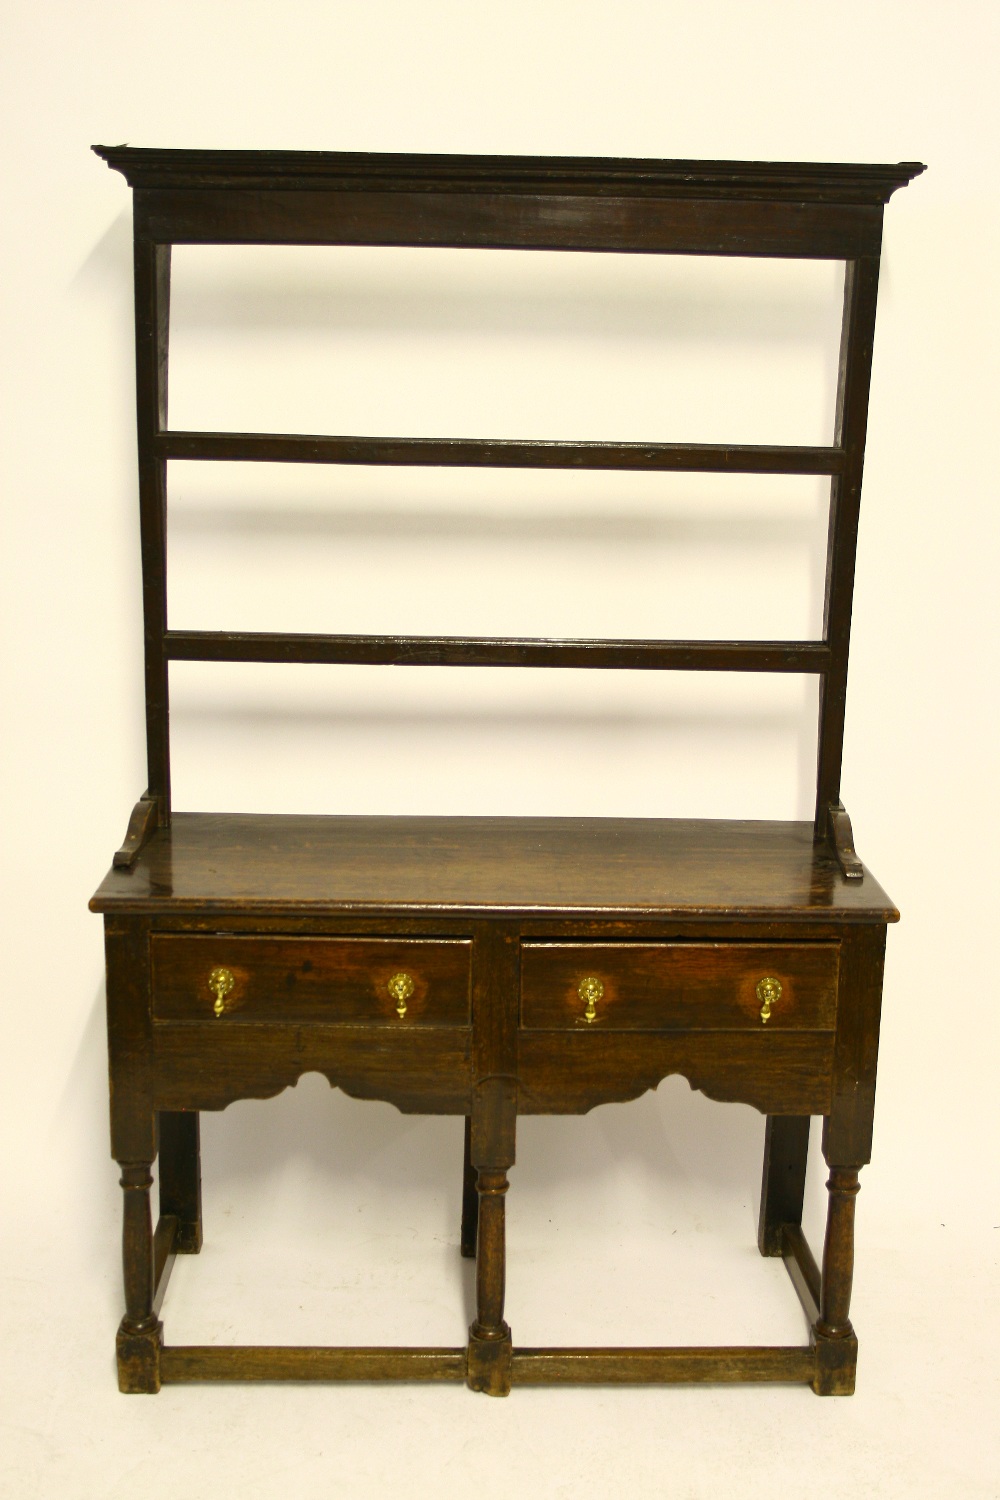 A LATE 18th century OAK SMALL DRESSER with open shelves above, fitted two frieze drawers with